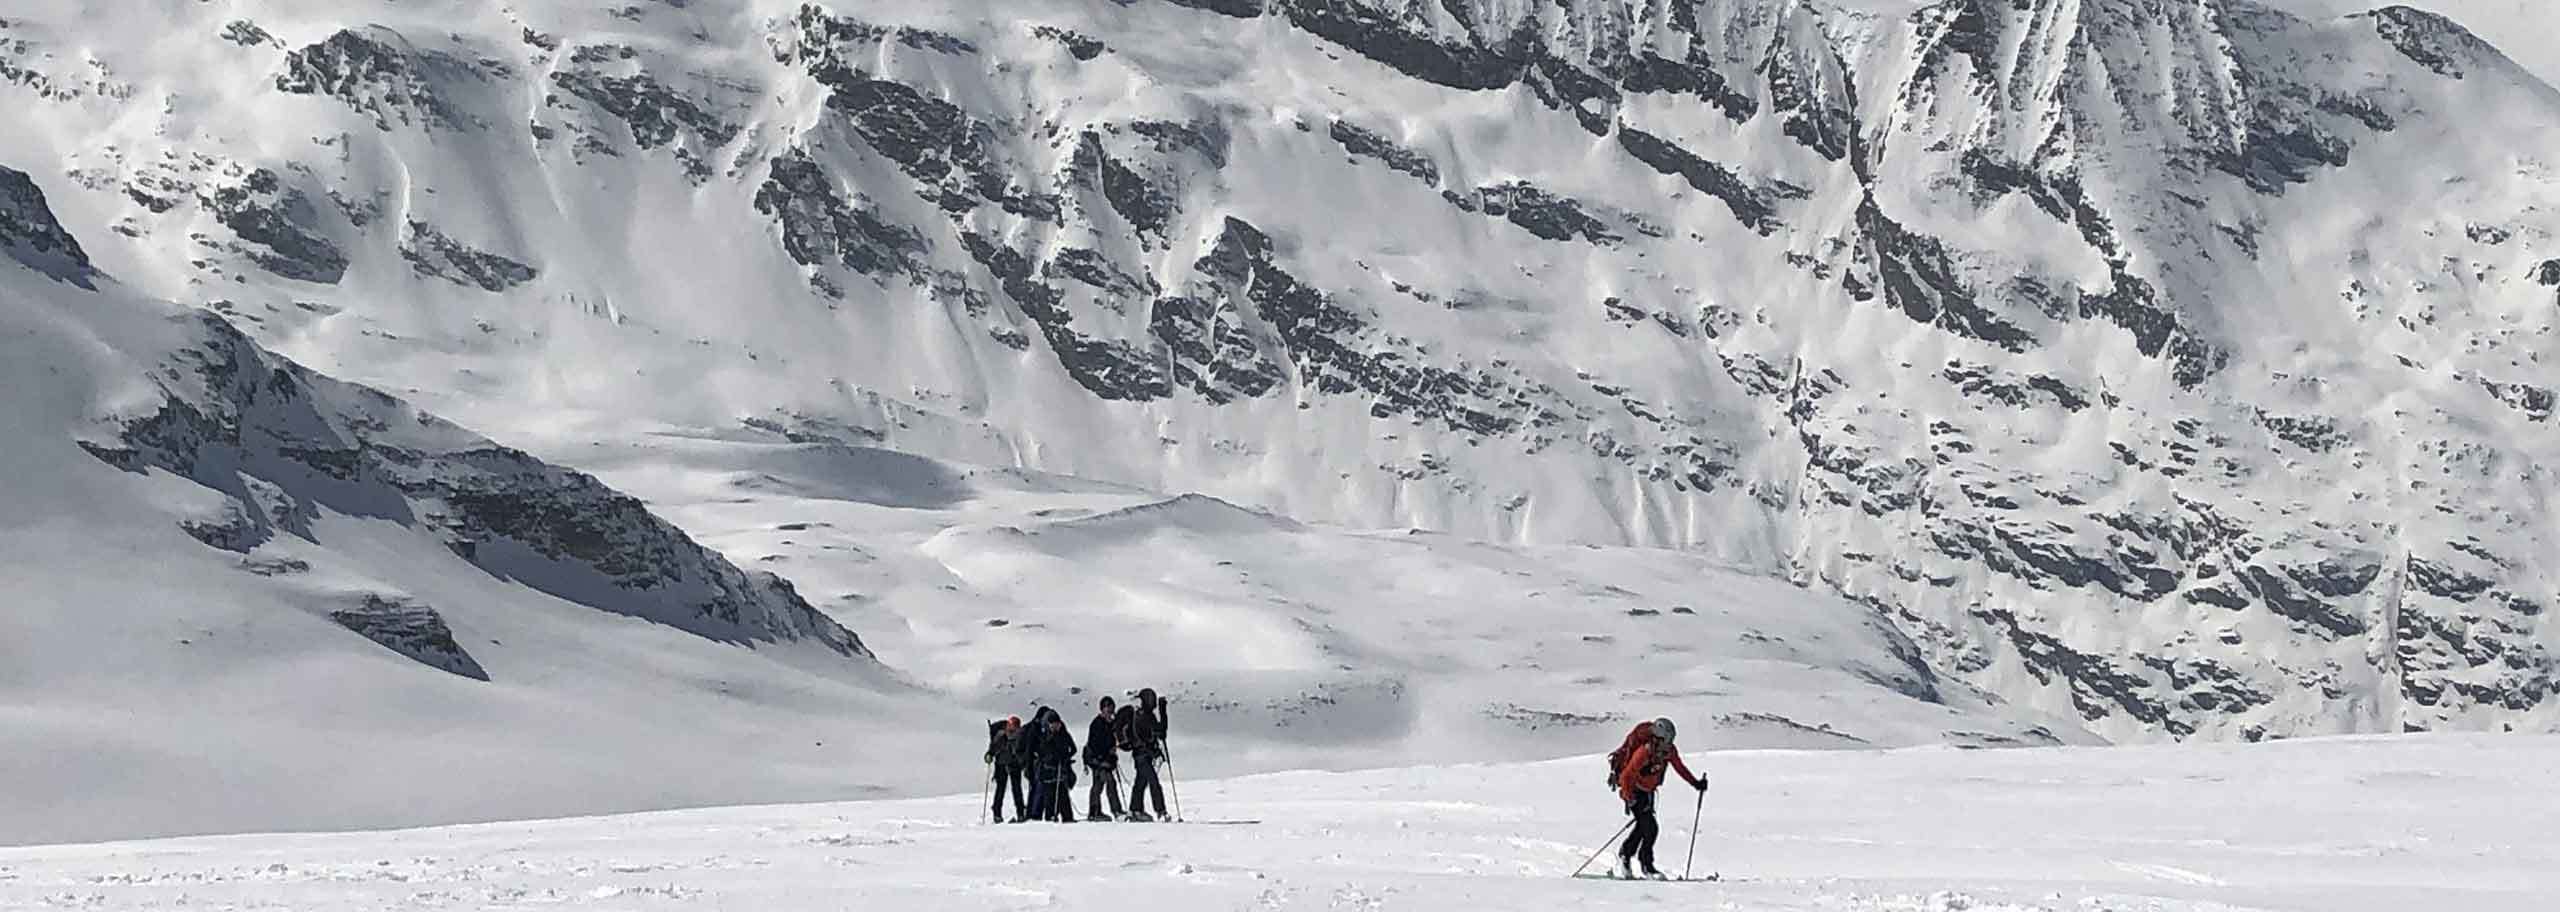 Ski Touring in Gran Paradiso with Mountain Guide